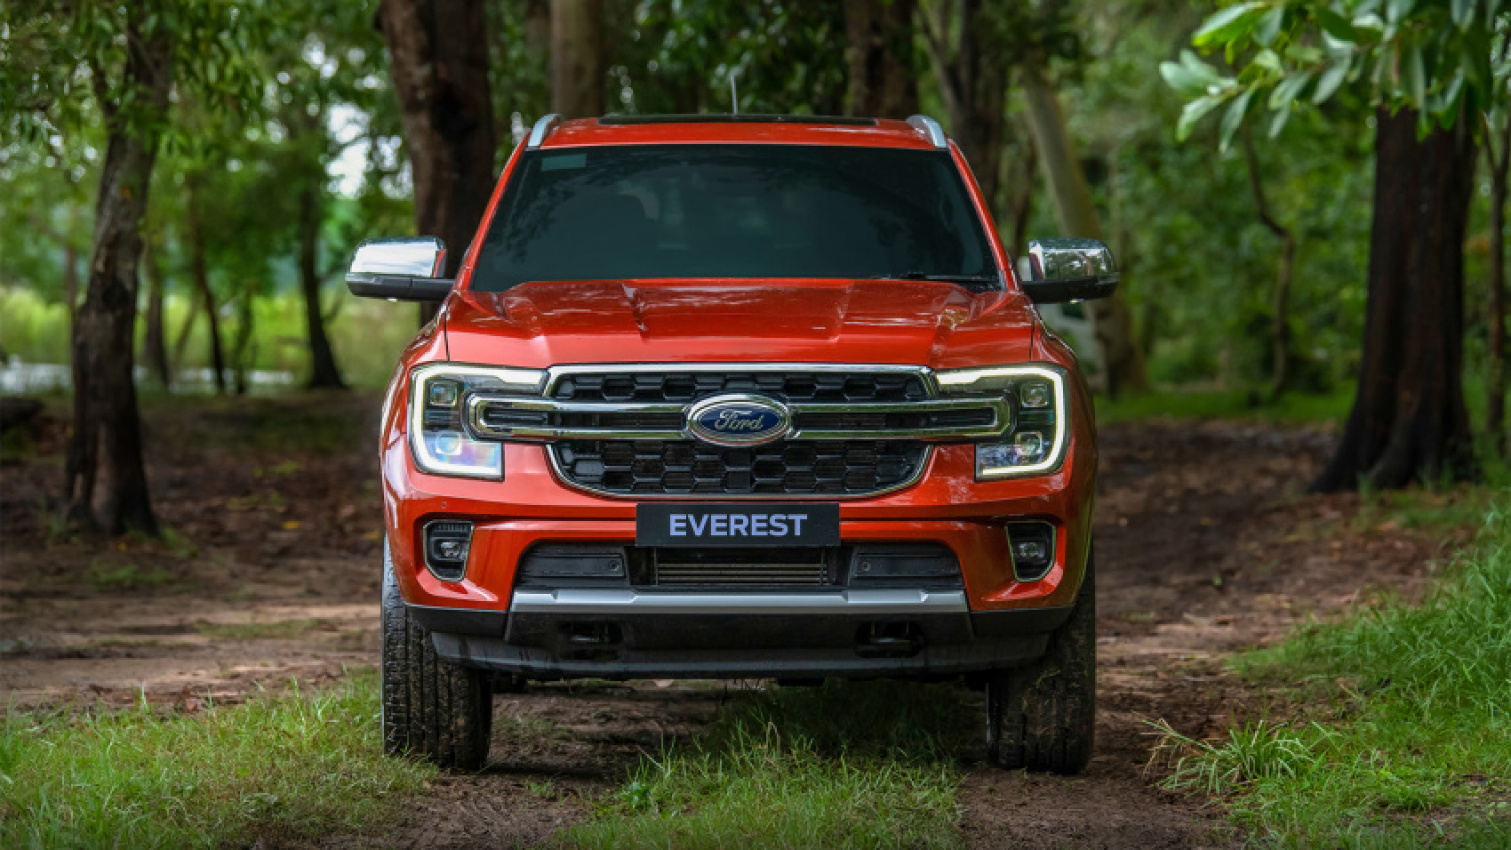 auto news, autos, cars, ford, ford everest, ford everest 2022, ford everest 2023, ford everest 4x4, ford everest platinum, ford everest titanium, 2023 ford everest: all-new seven seater suv finally revealed